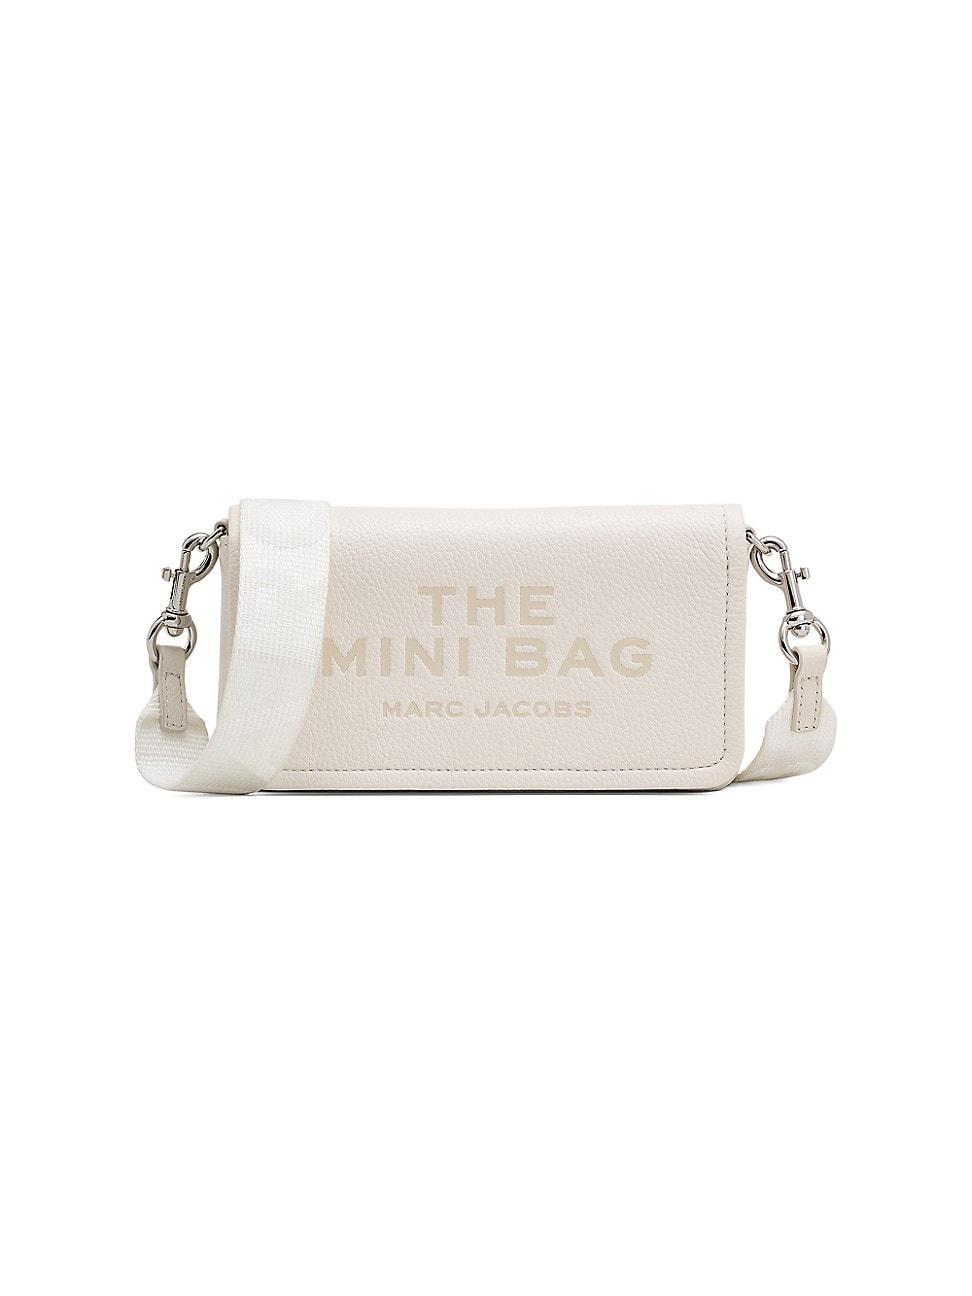 Marc Jacobs The Mini Leather Crossbody Bag Product Image